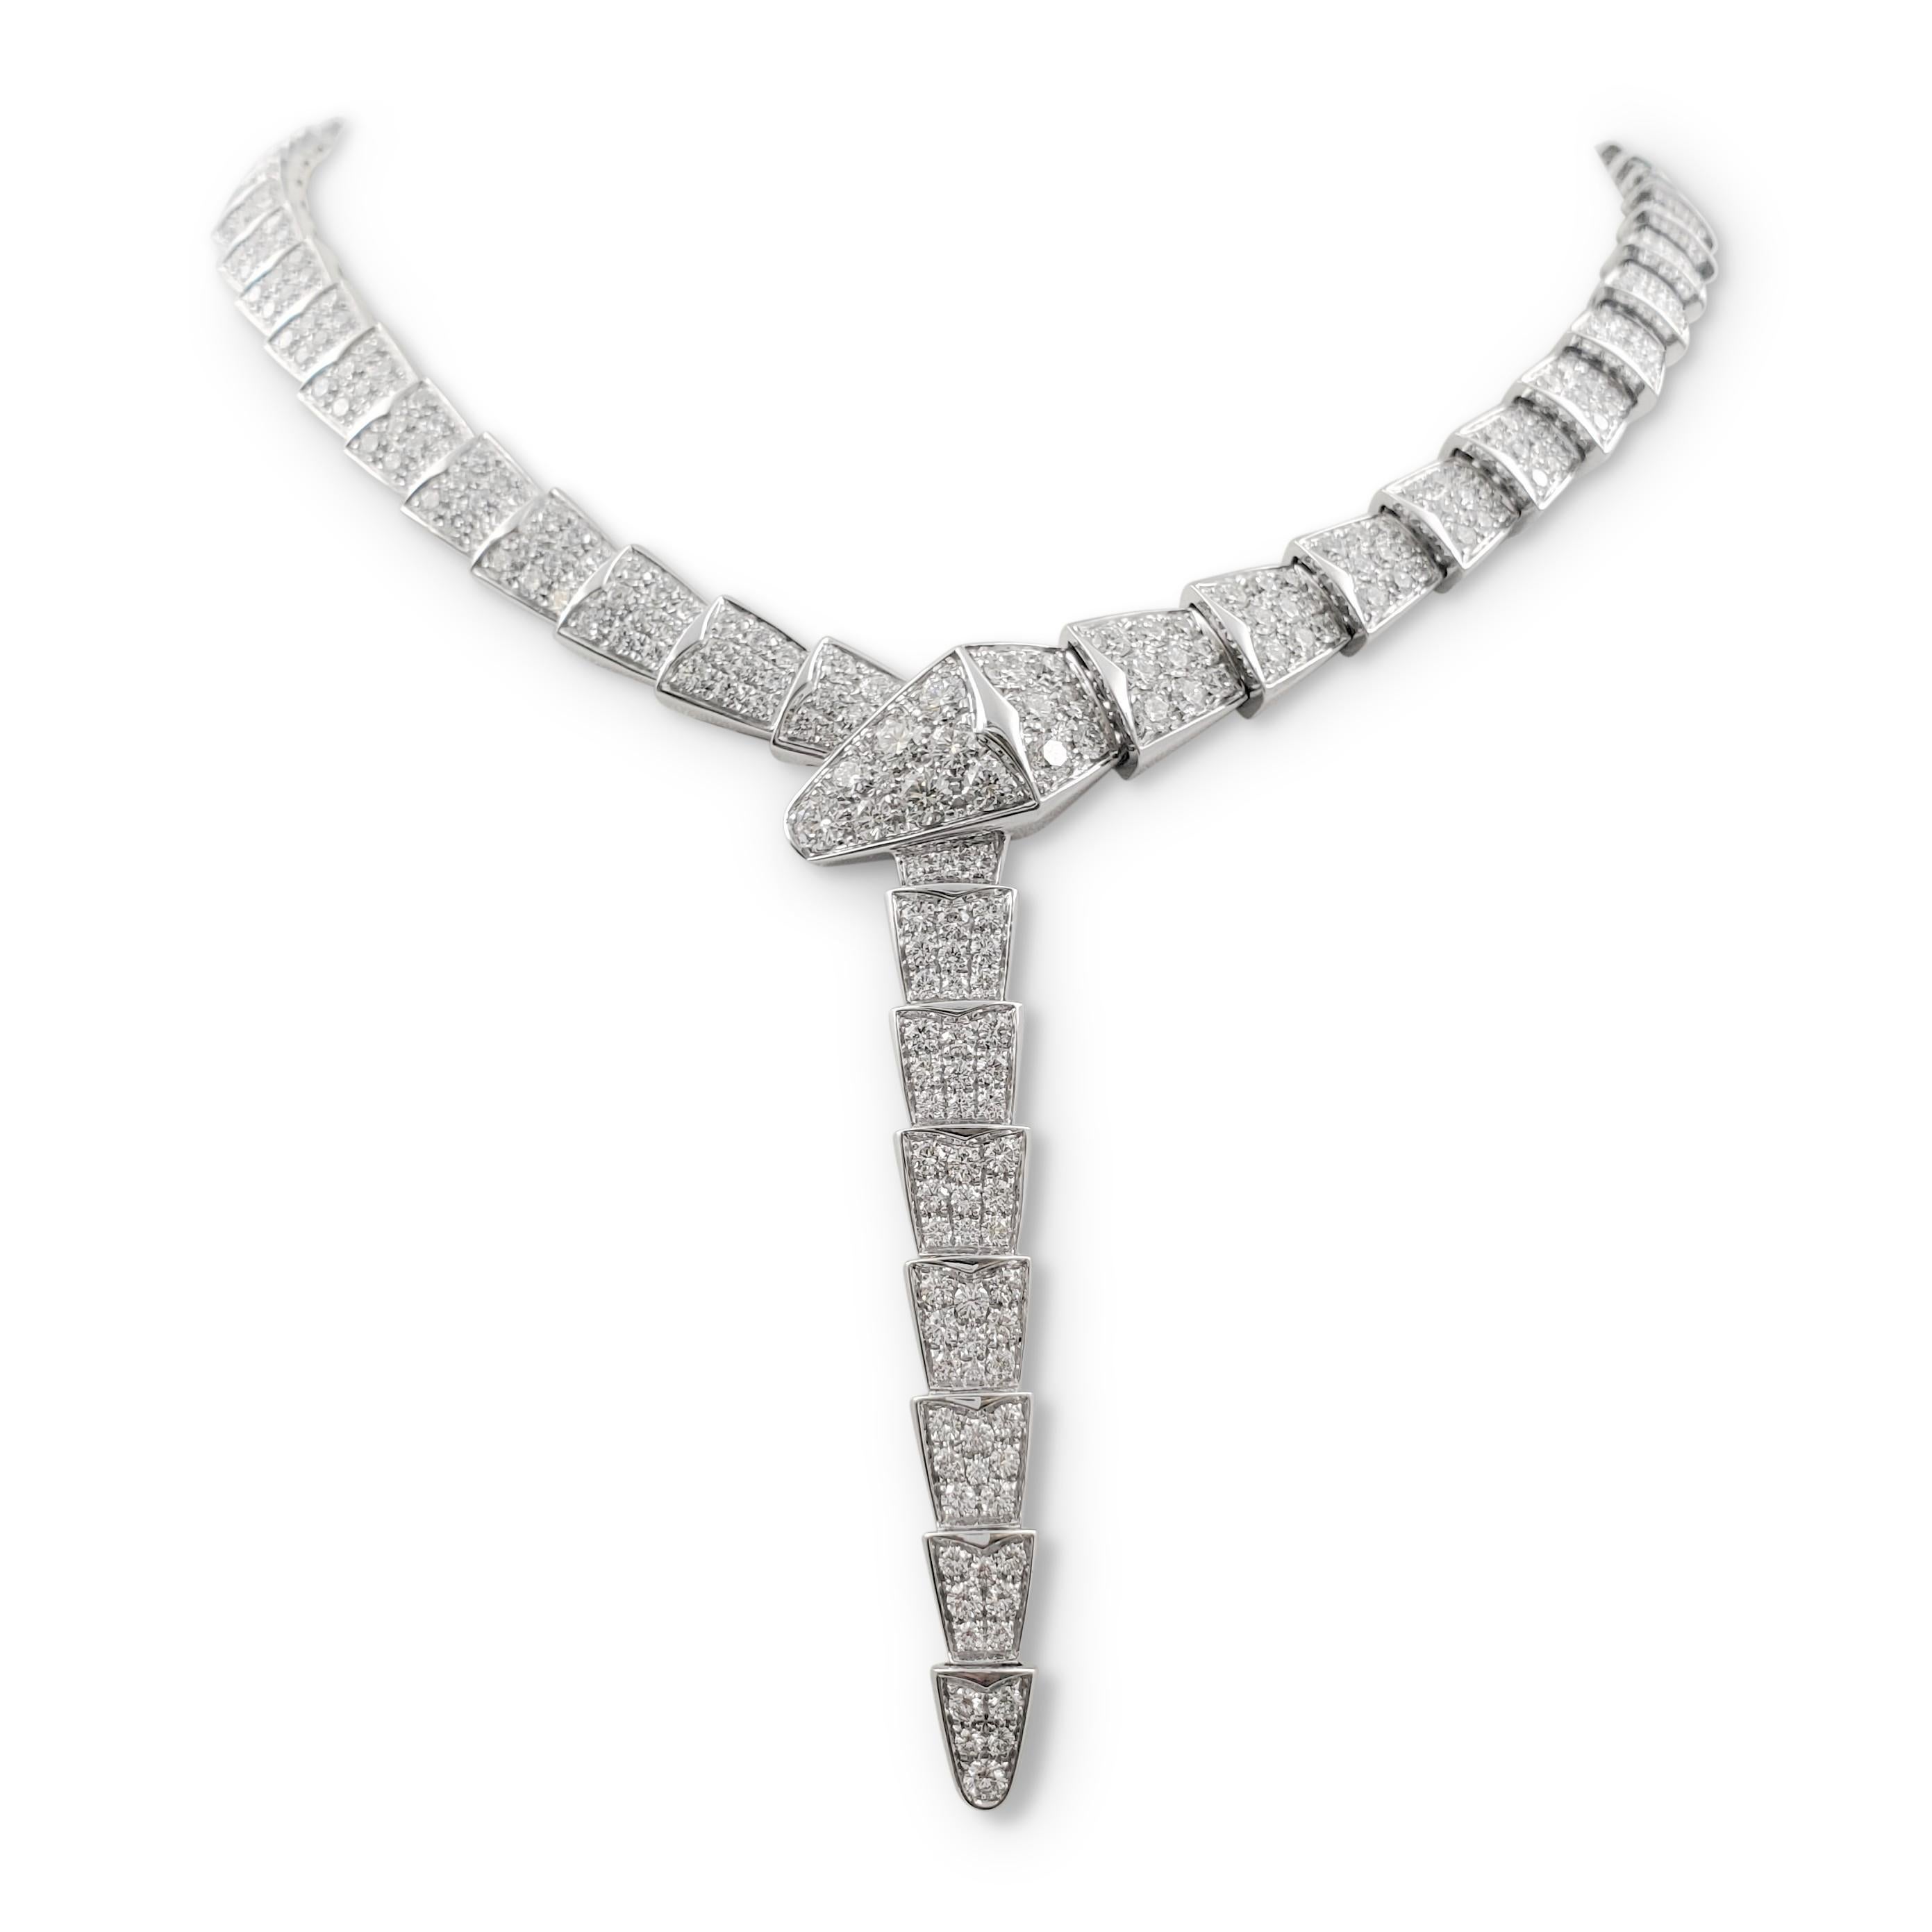 Authentic glamorous Bvlagri 'Serpenti Viper' necklace is a tribute to the house's spirit animal. The hypnotic design is comprised of stacked diamond-set geometric links resembling a snake's scales that coil around the neck. Crafted in 18 karat white